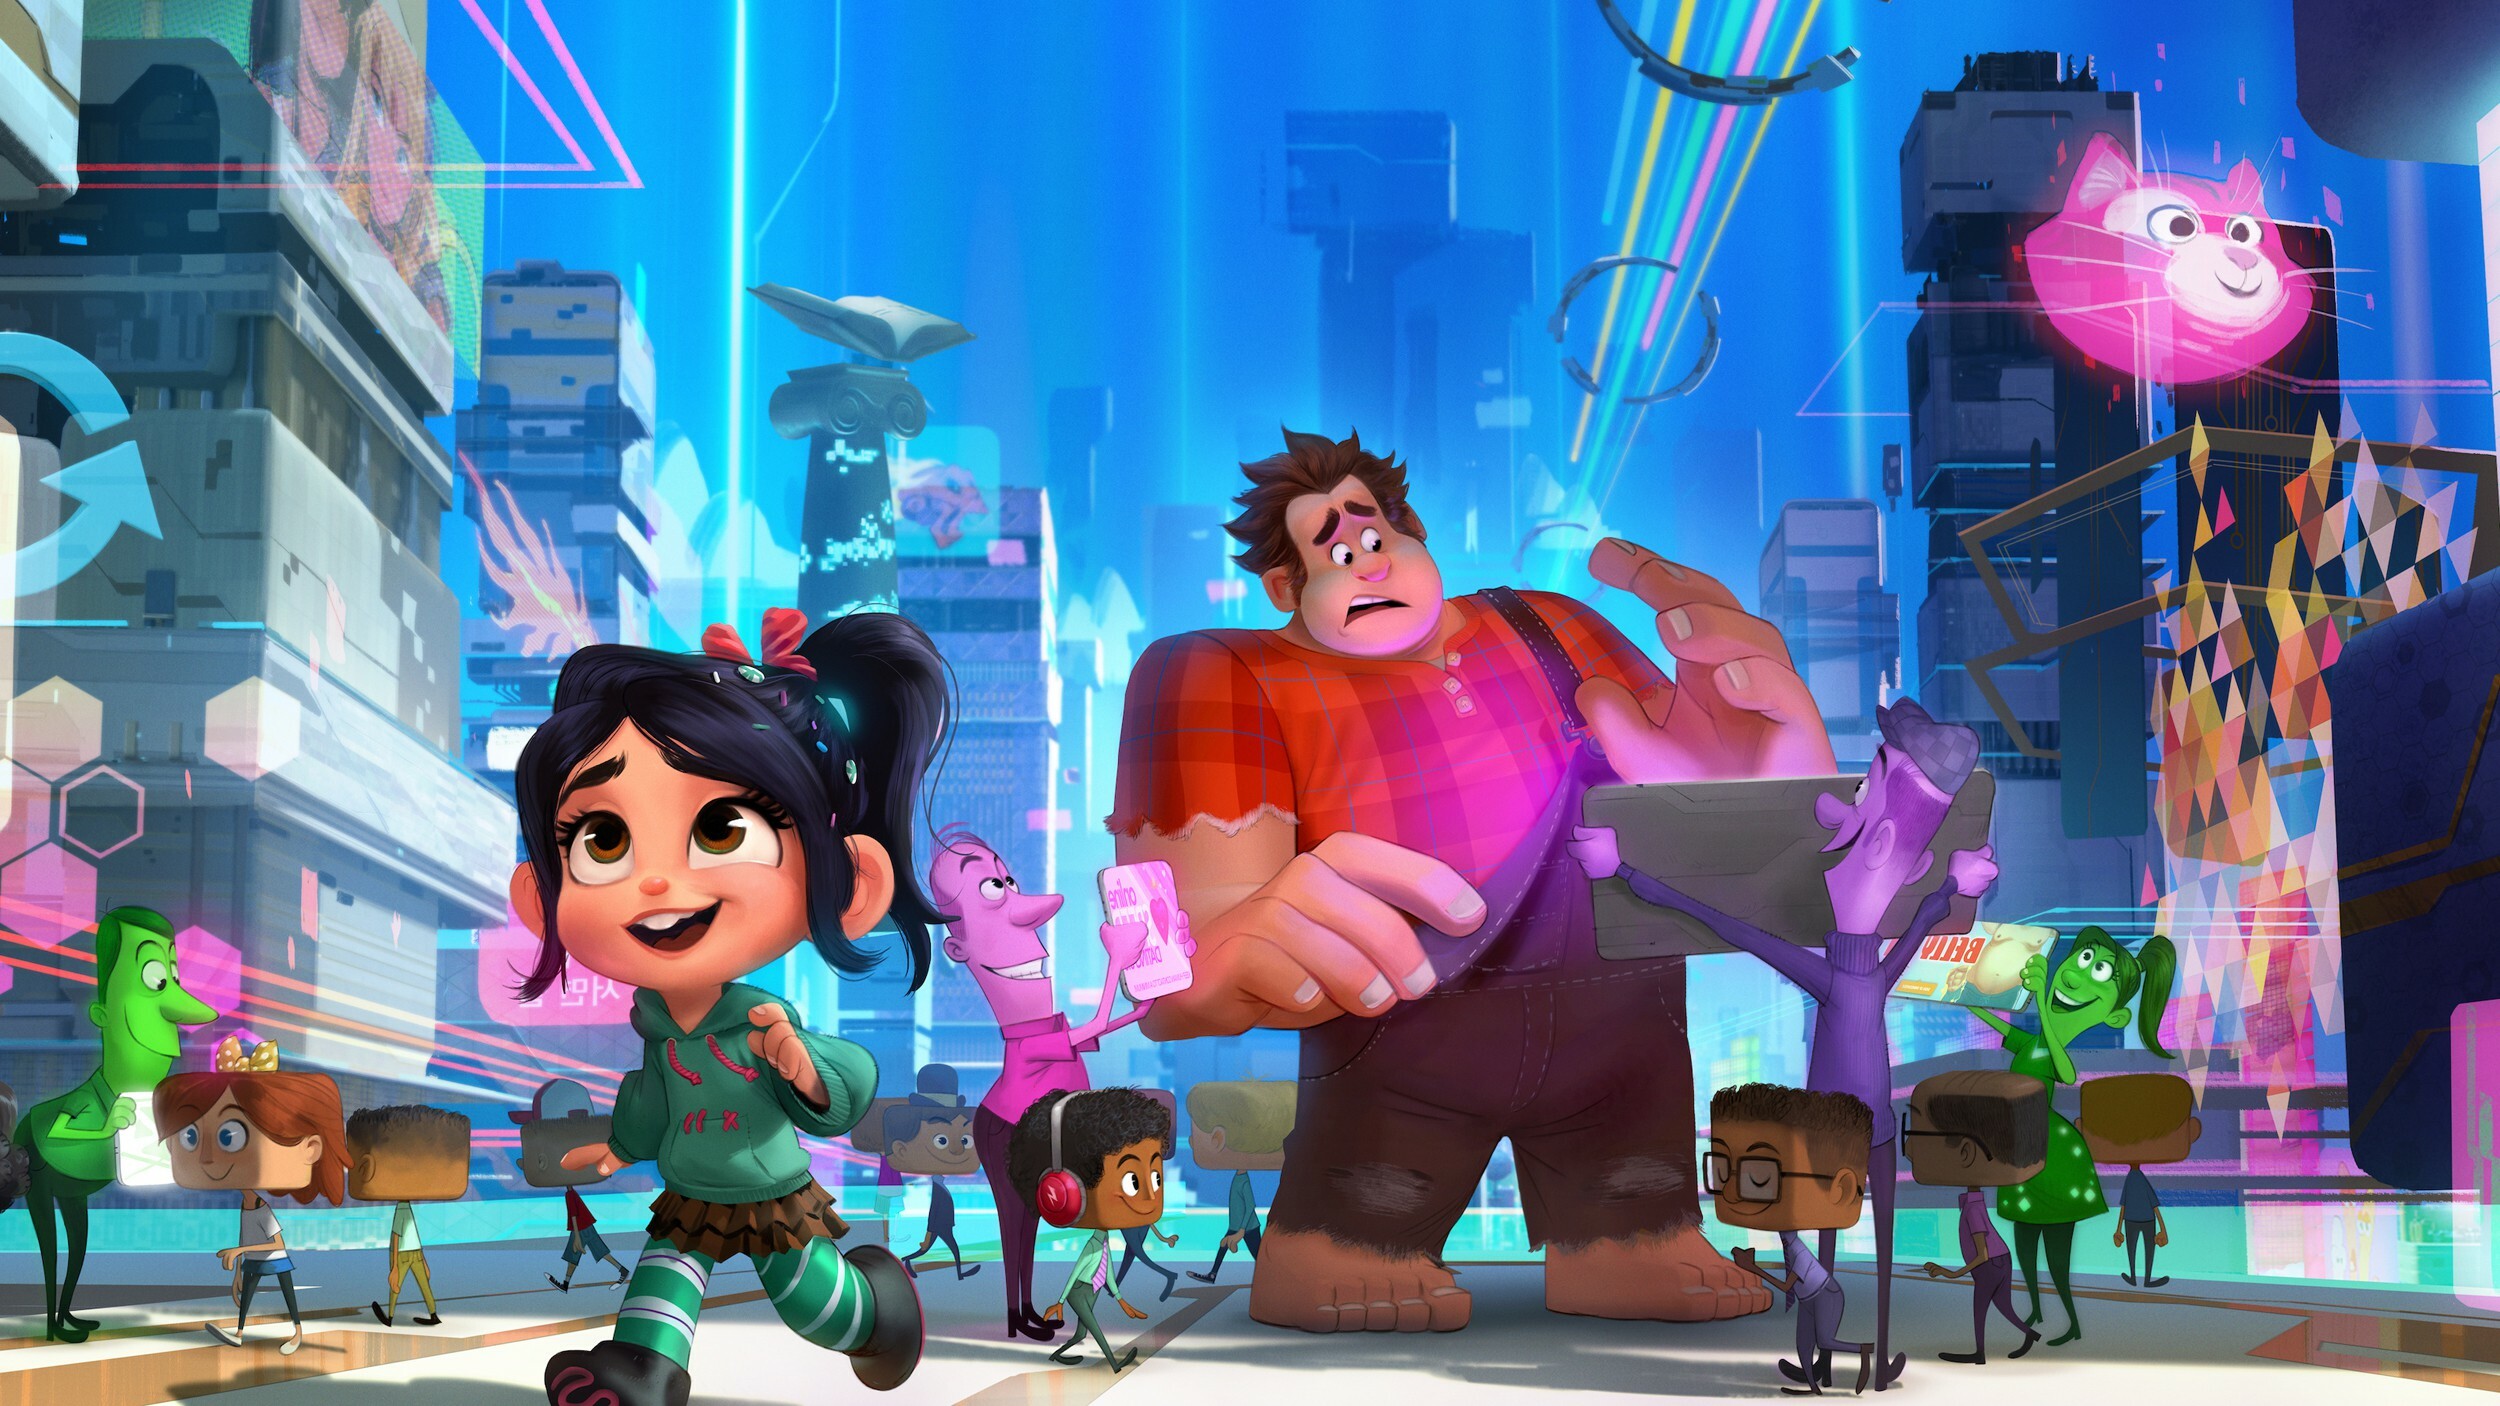 Wreck-It Ralph: The arcade-game character is tired of always being the "bad guy" and losing to his "good guy" opponent, Fix-It Felix. 2500x1410 HD Wallpaper.